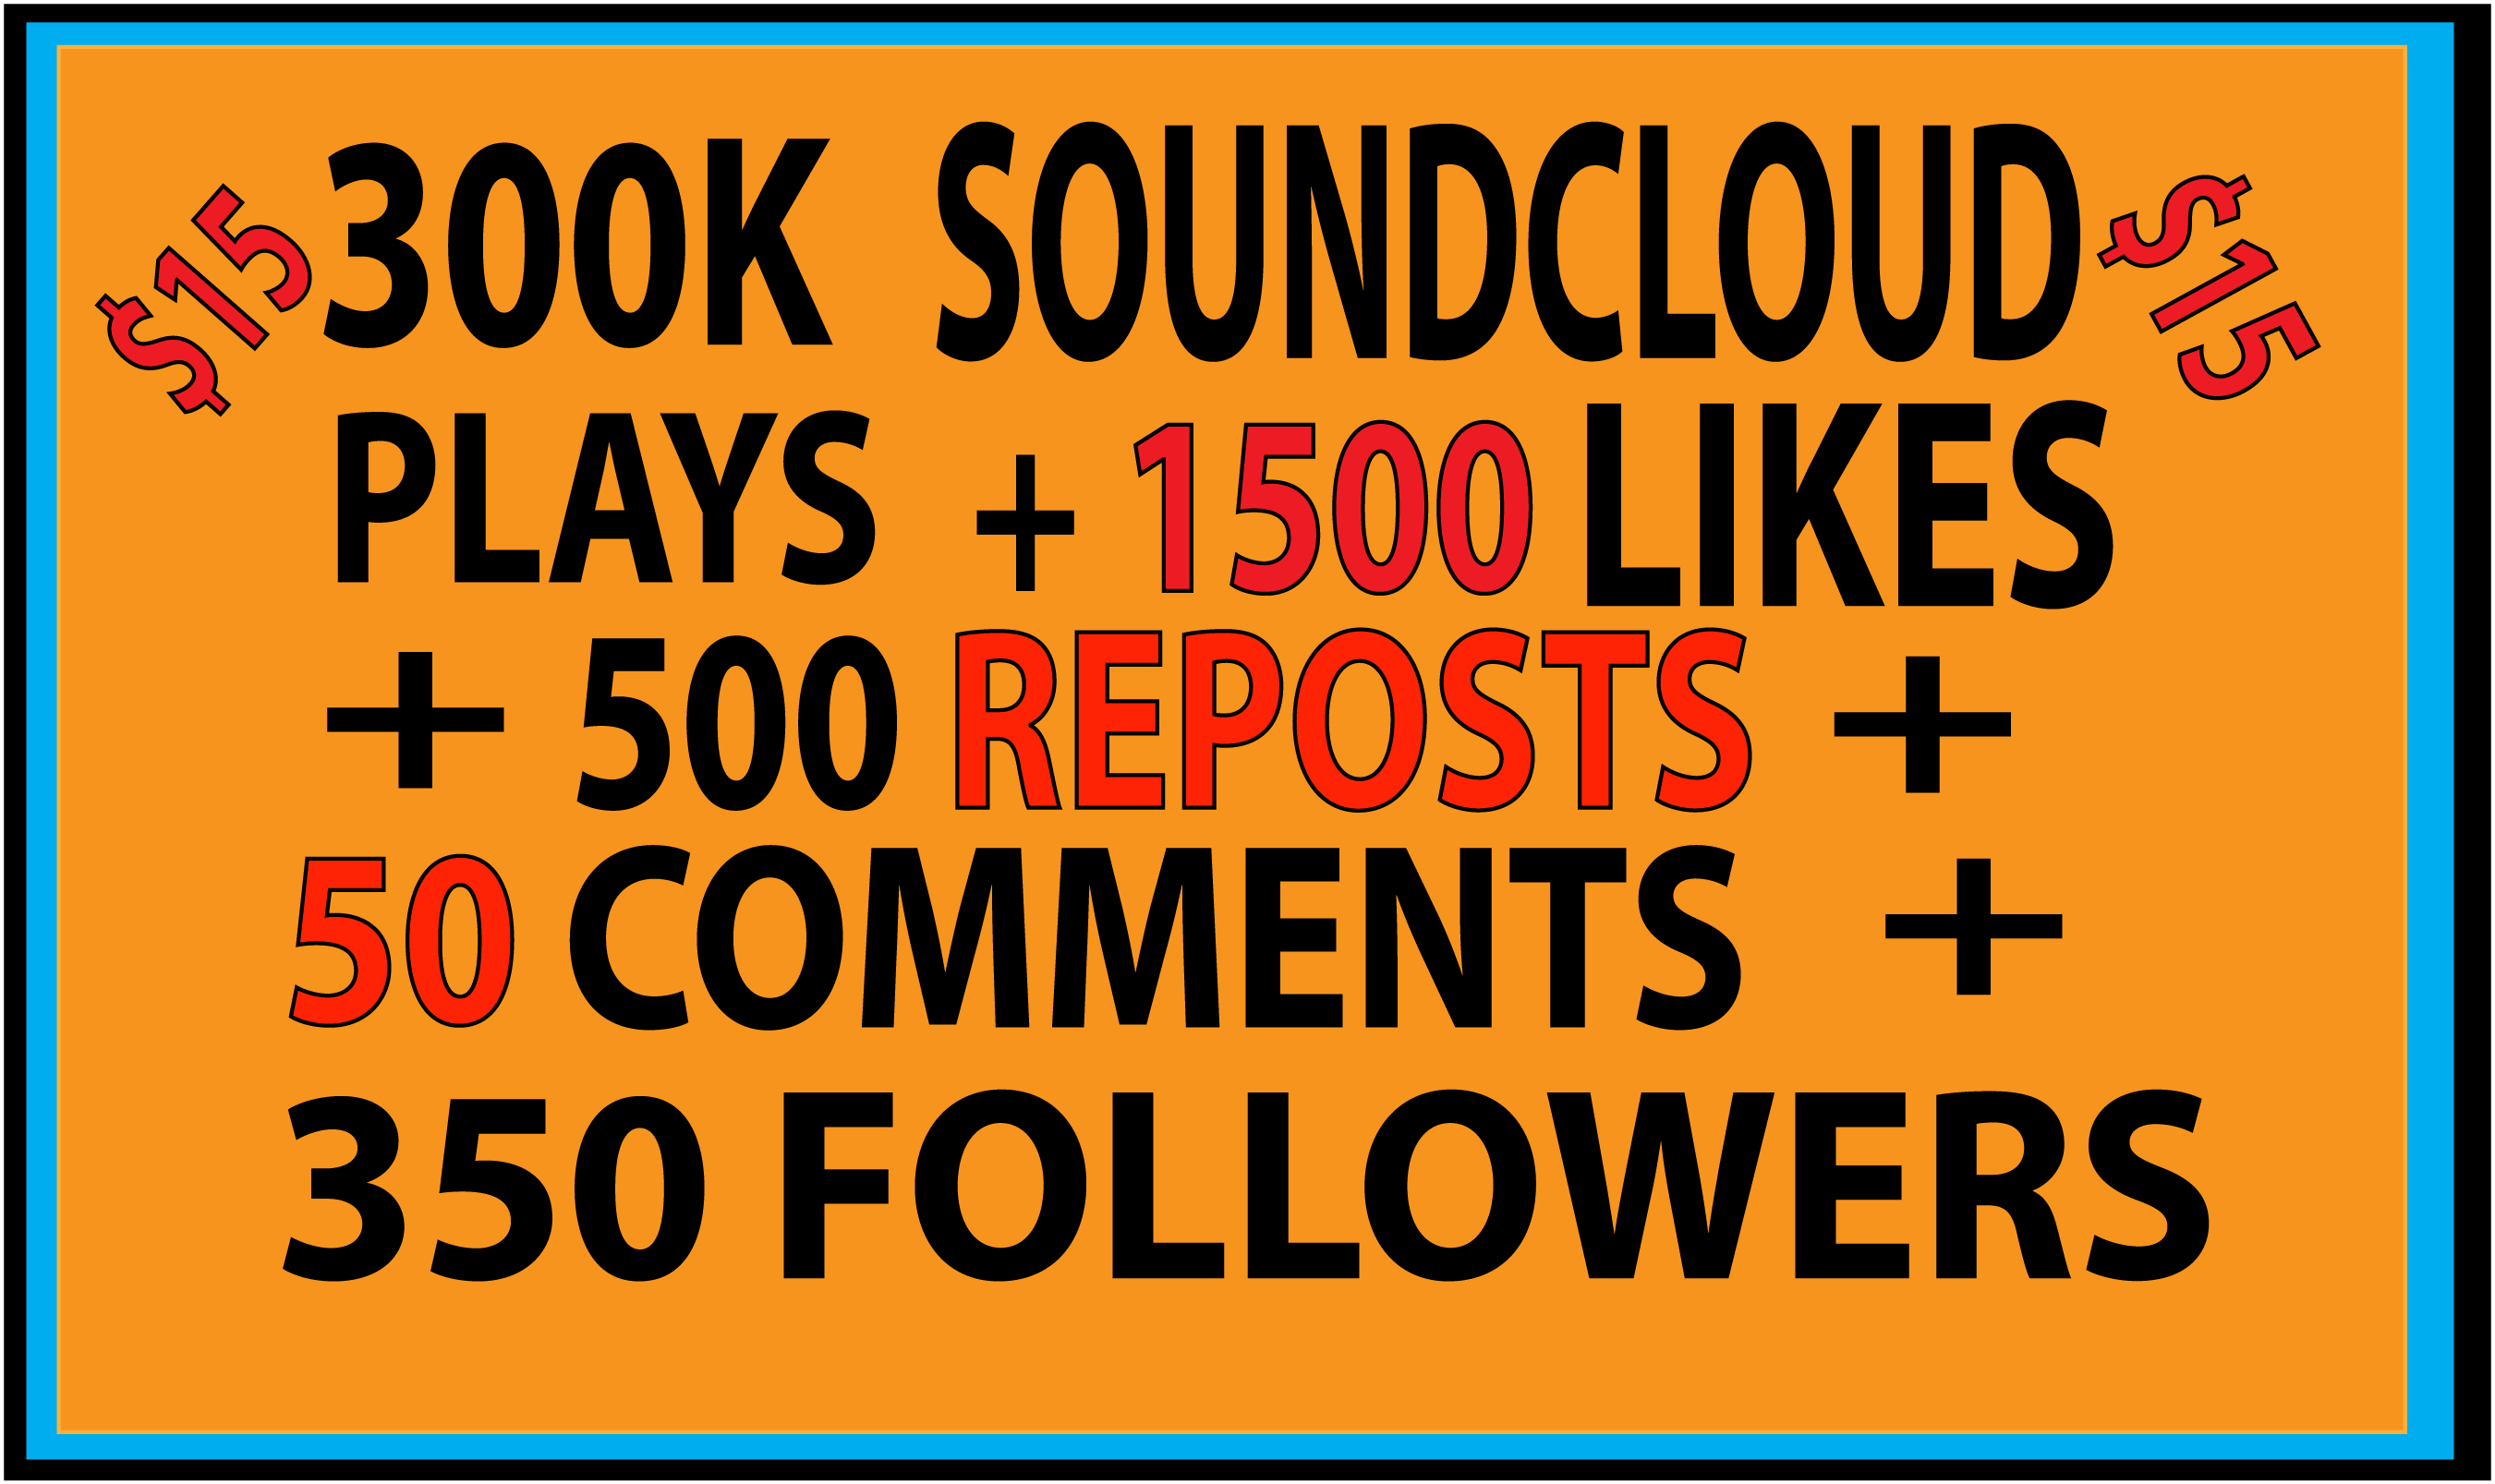 350K SOUNDCLOUD PLAYS 1500 LIKES, 500 REPOST, 50 COMMENTS, 350 FOLLWERS